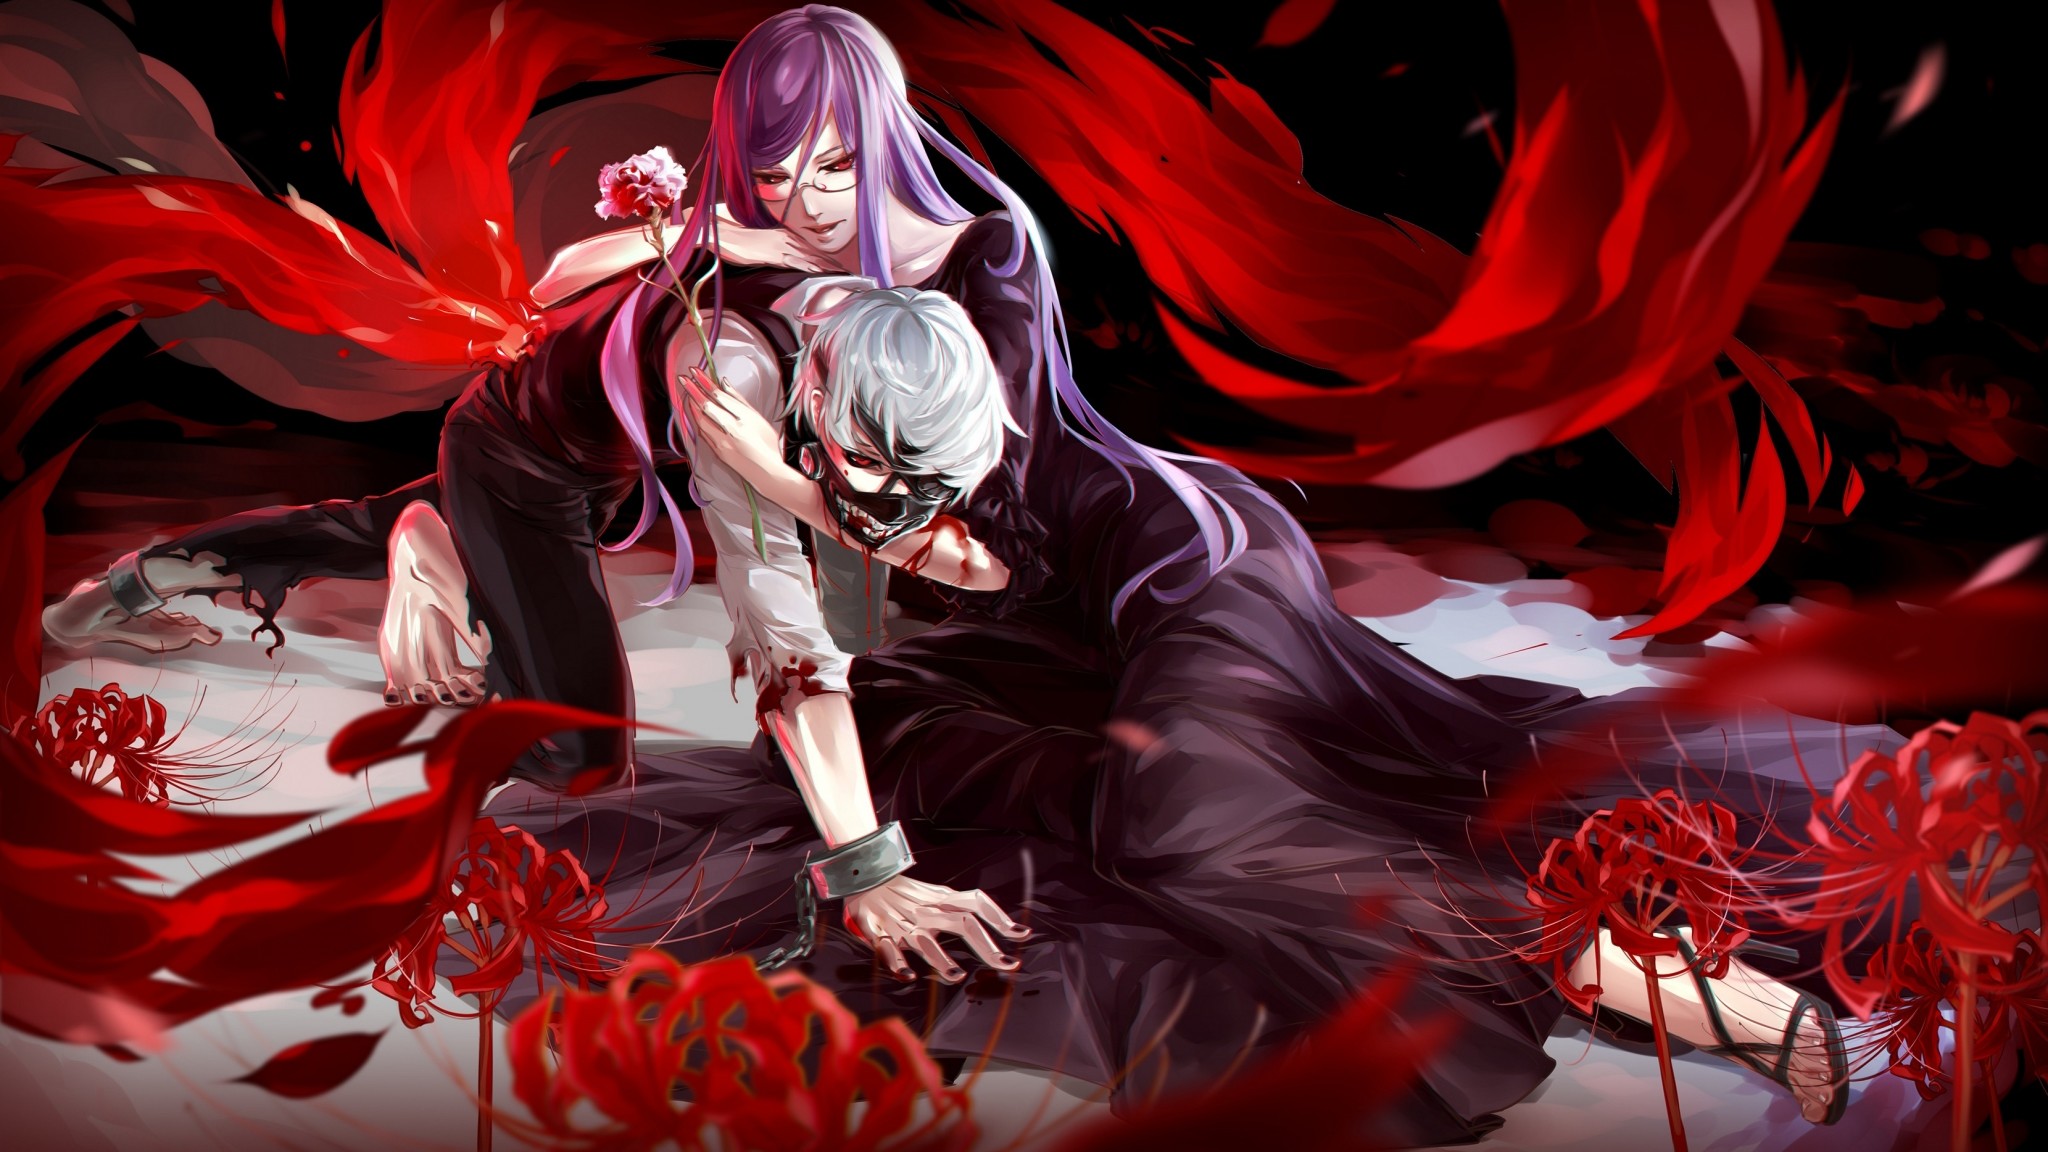 Download Tokyo Ghoul Amazing Anime Christmas Wallpaper In Many Resolutions